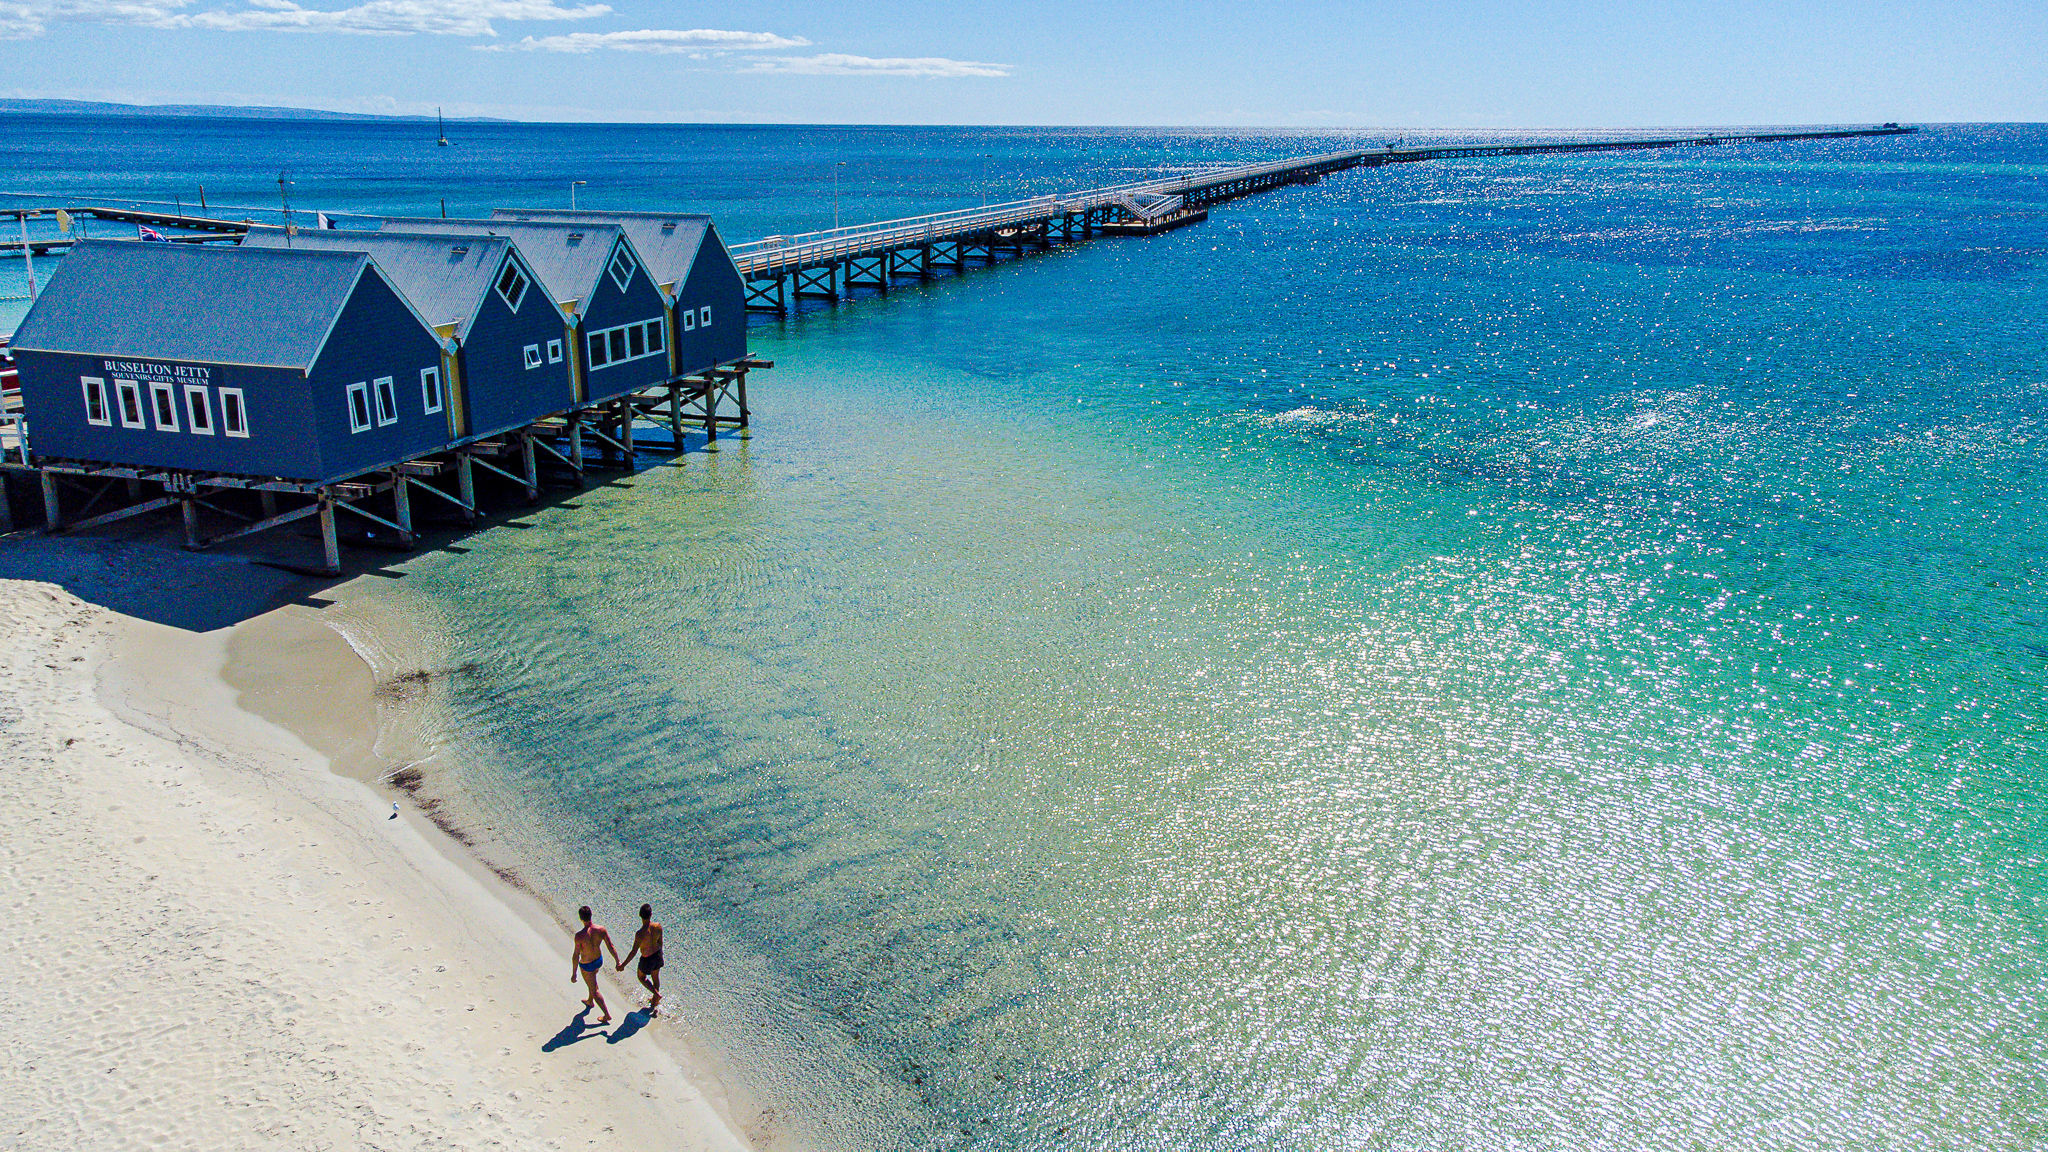 Busselton Jetty. Credit Husbands That Travel